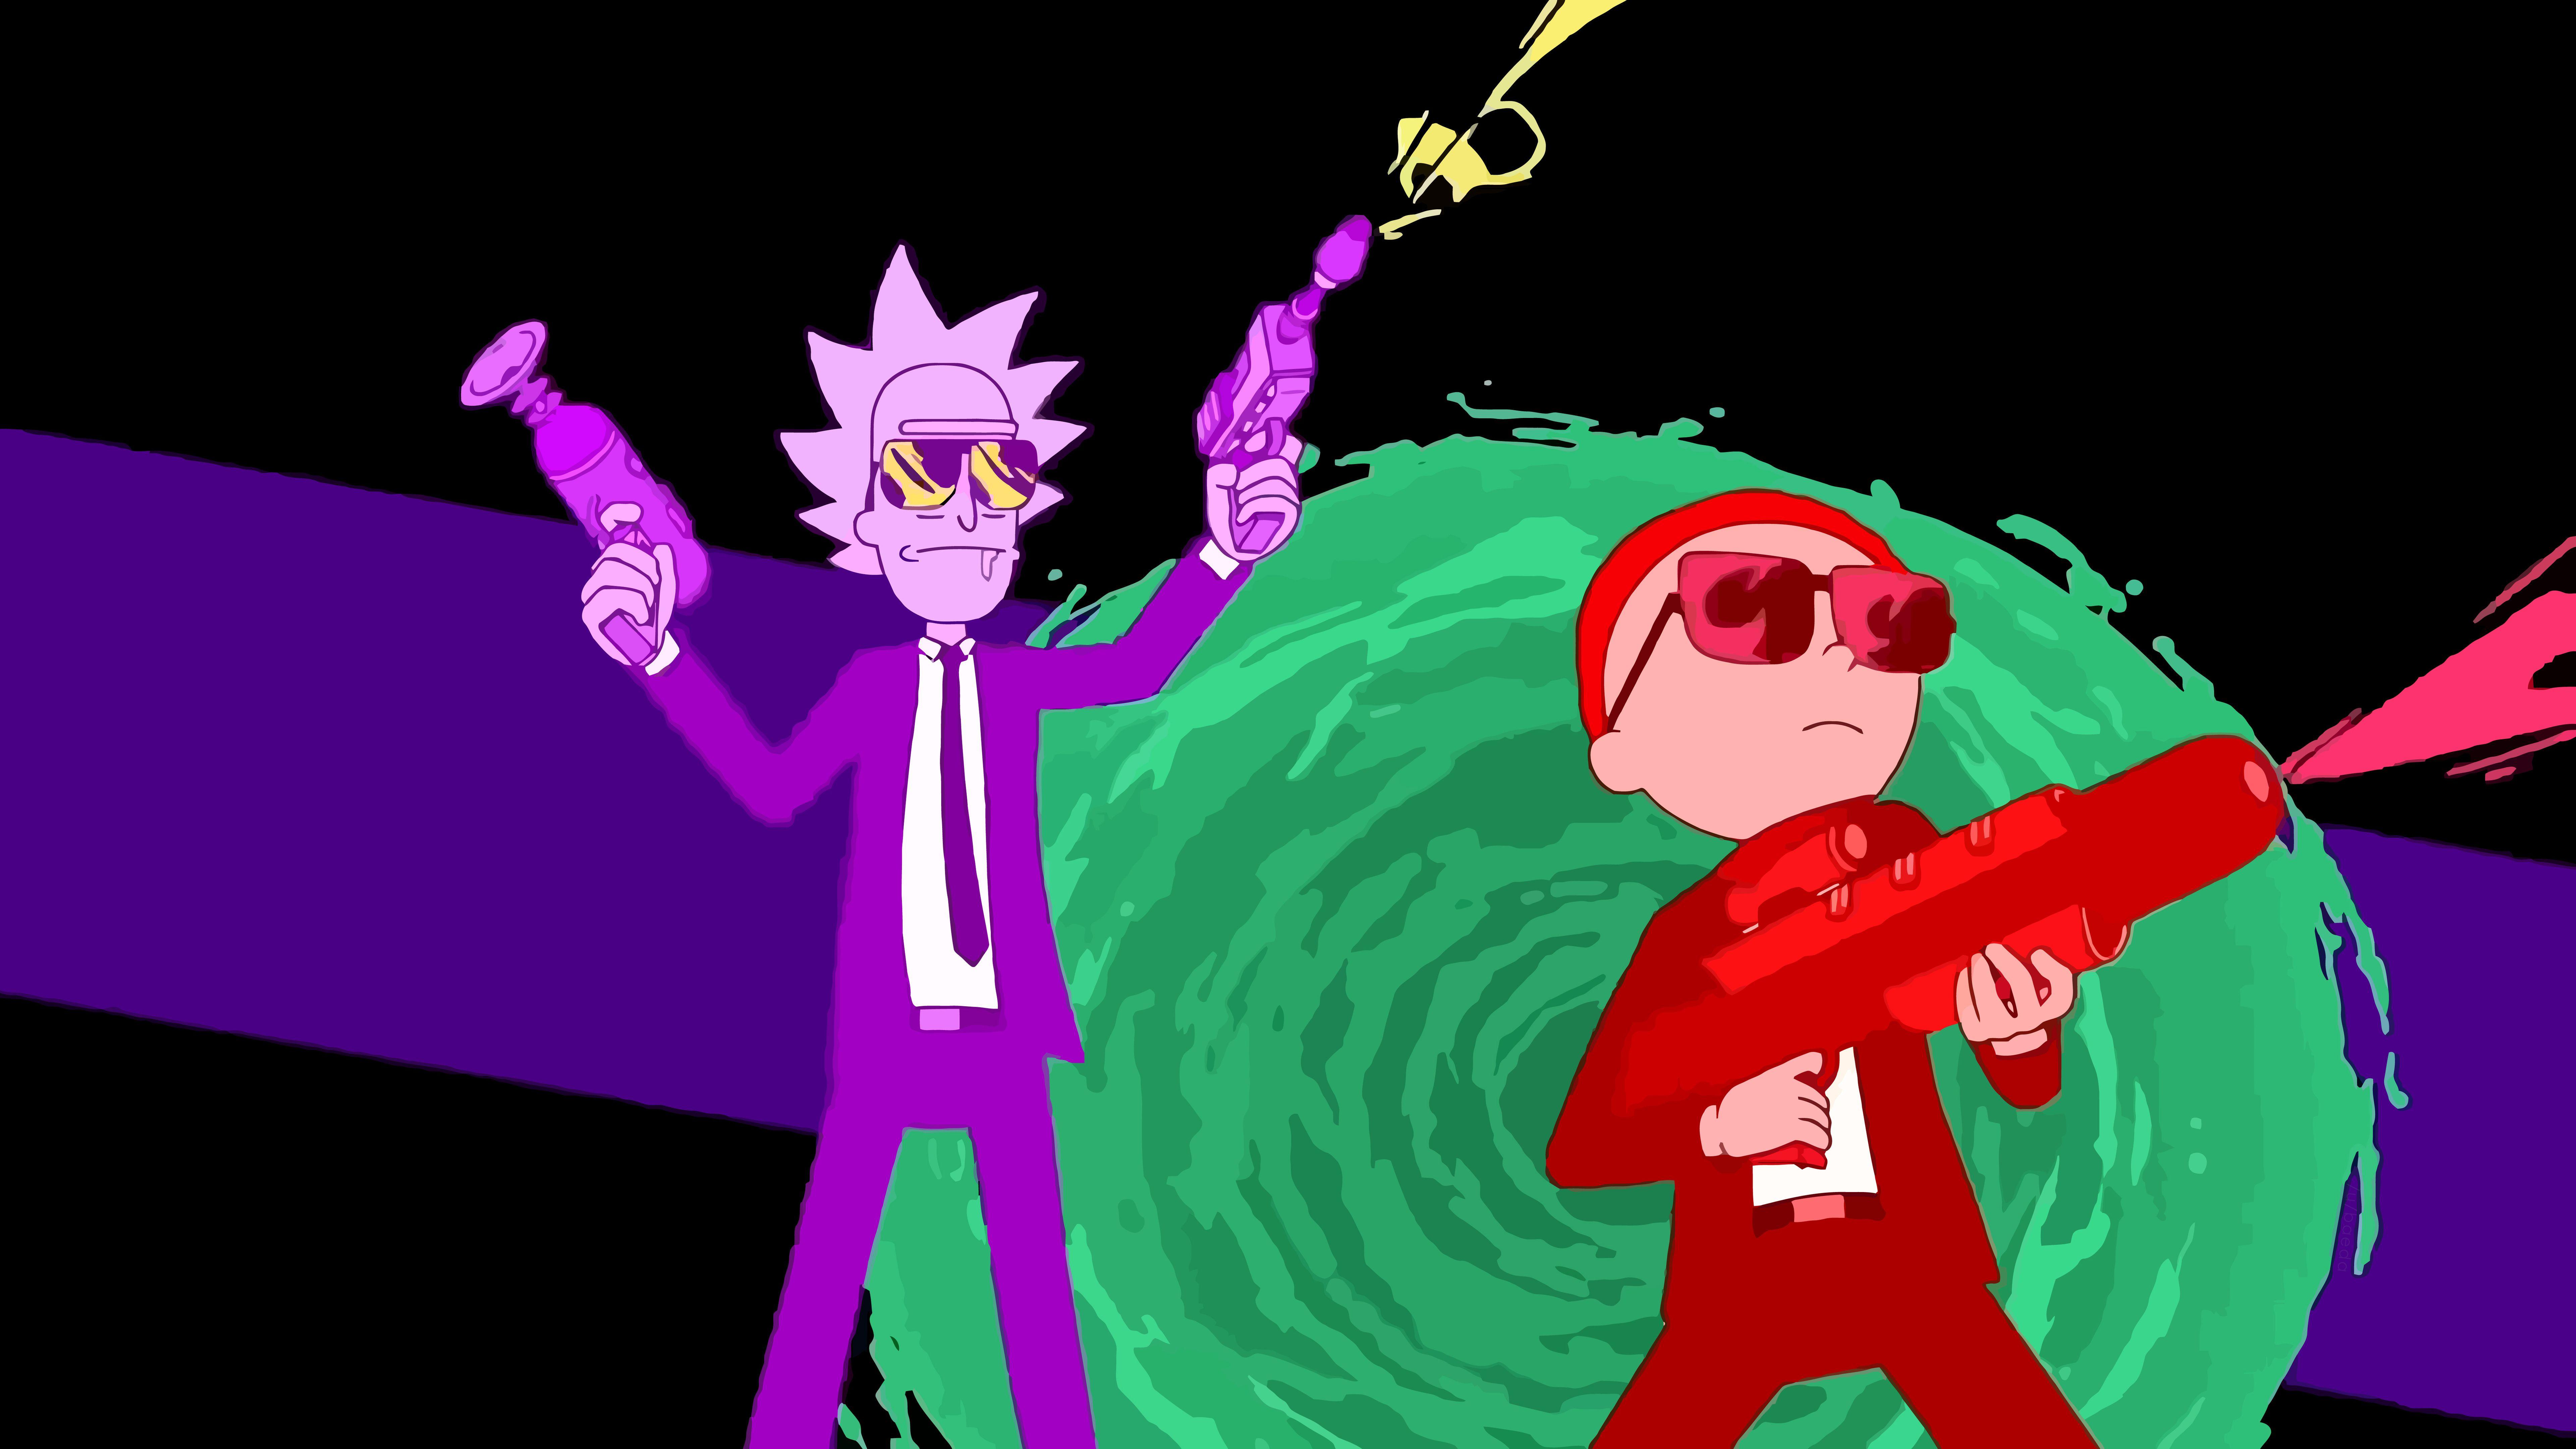 4k Rick and Morty Wallpaper I created from Run The Jewels music video   Rick and morty poster, Iphone wallpaper rick and morty, Rick and morty  stickers